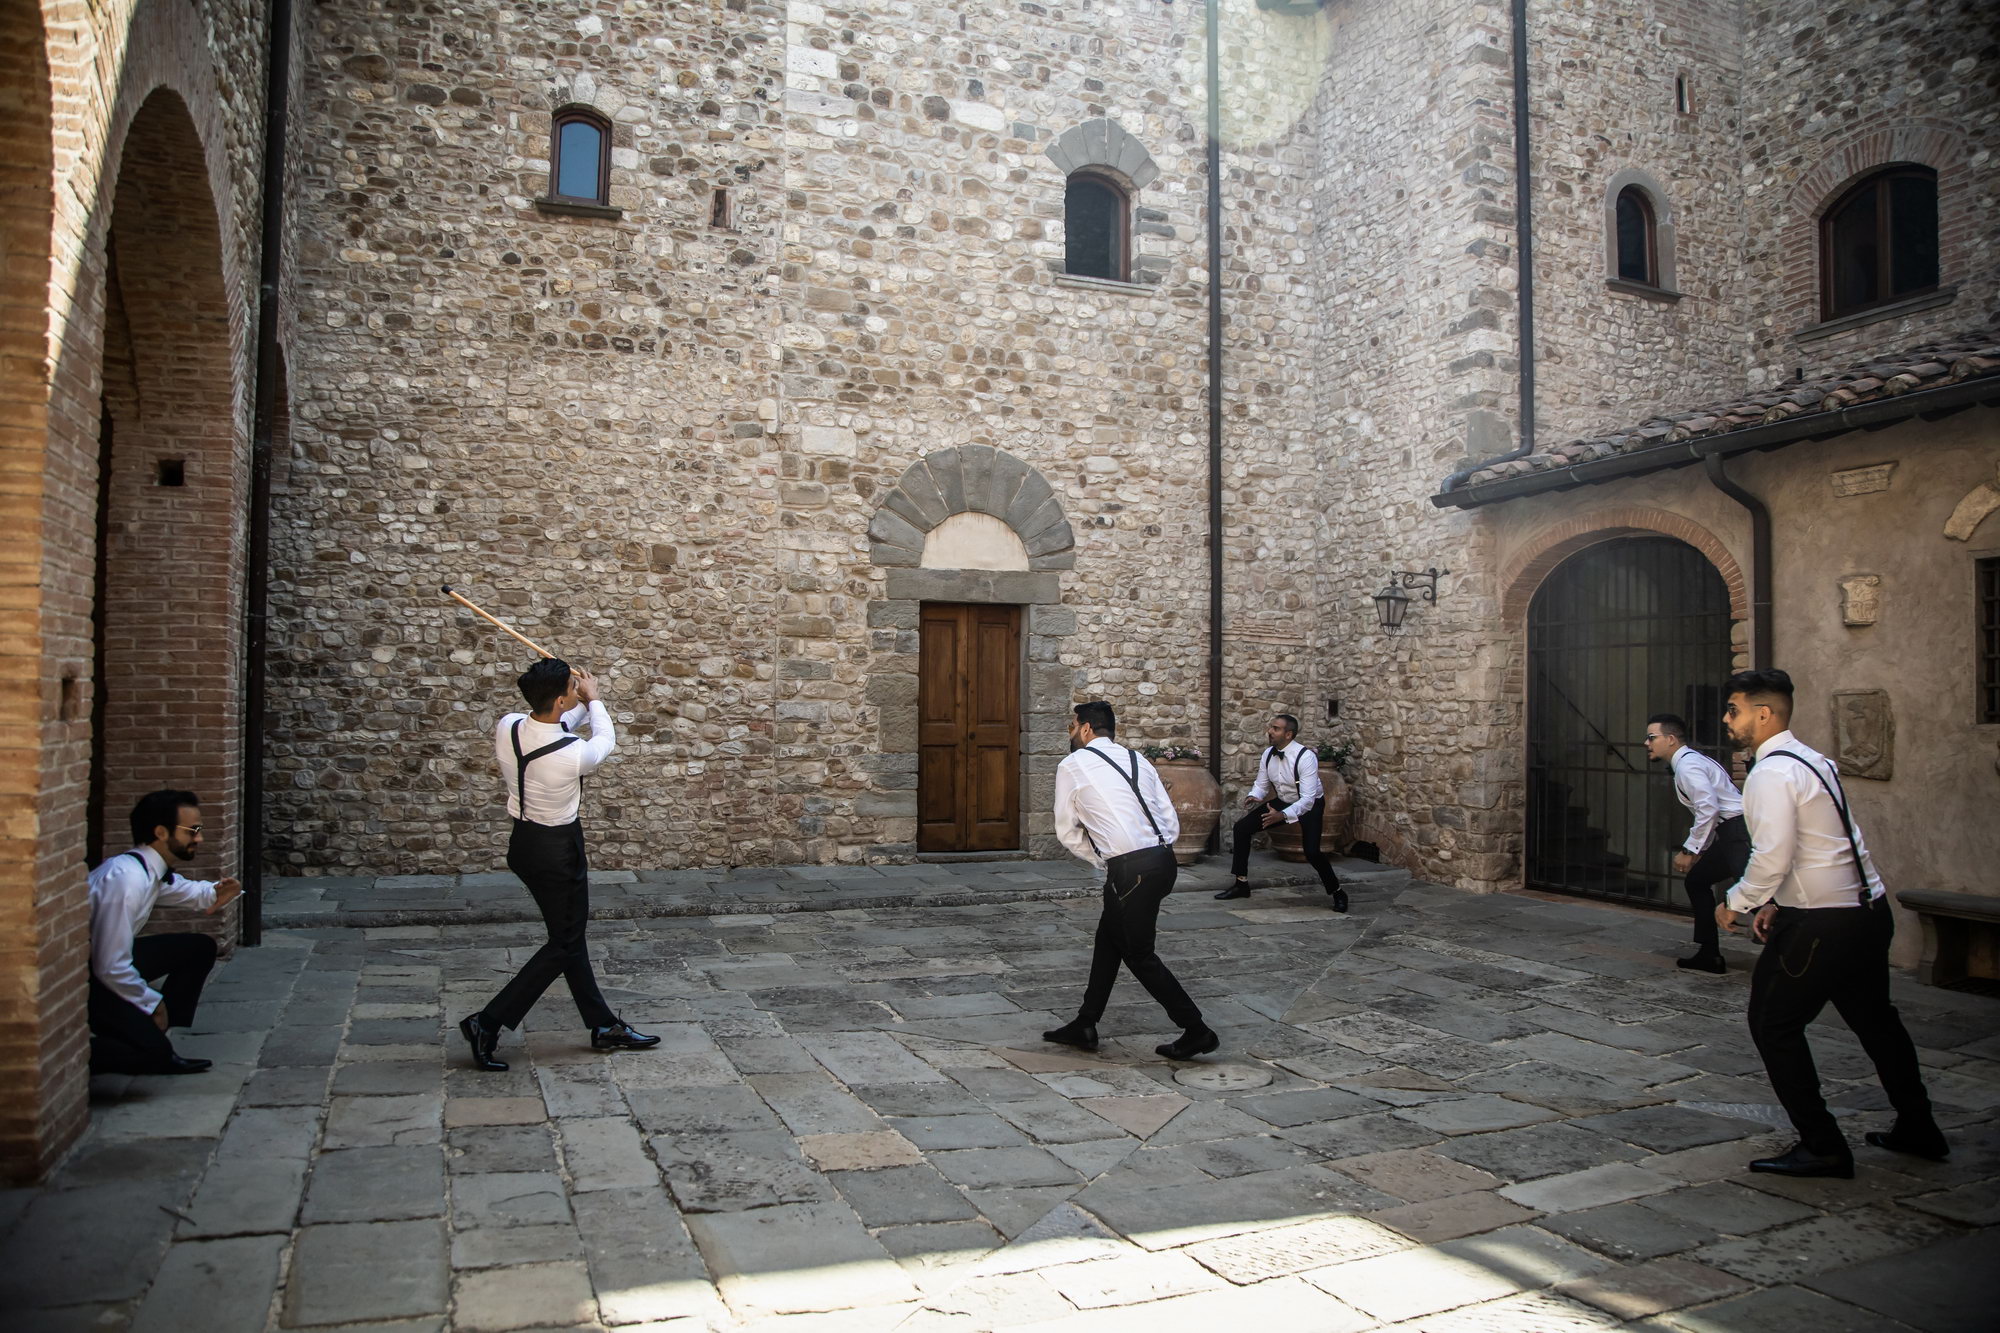 ..imagesweddings enthe dream of getting married in Italy wedding photographers photo27_034 by Photo27